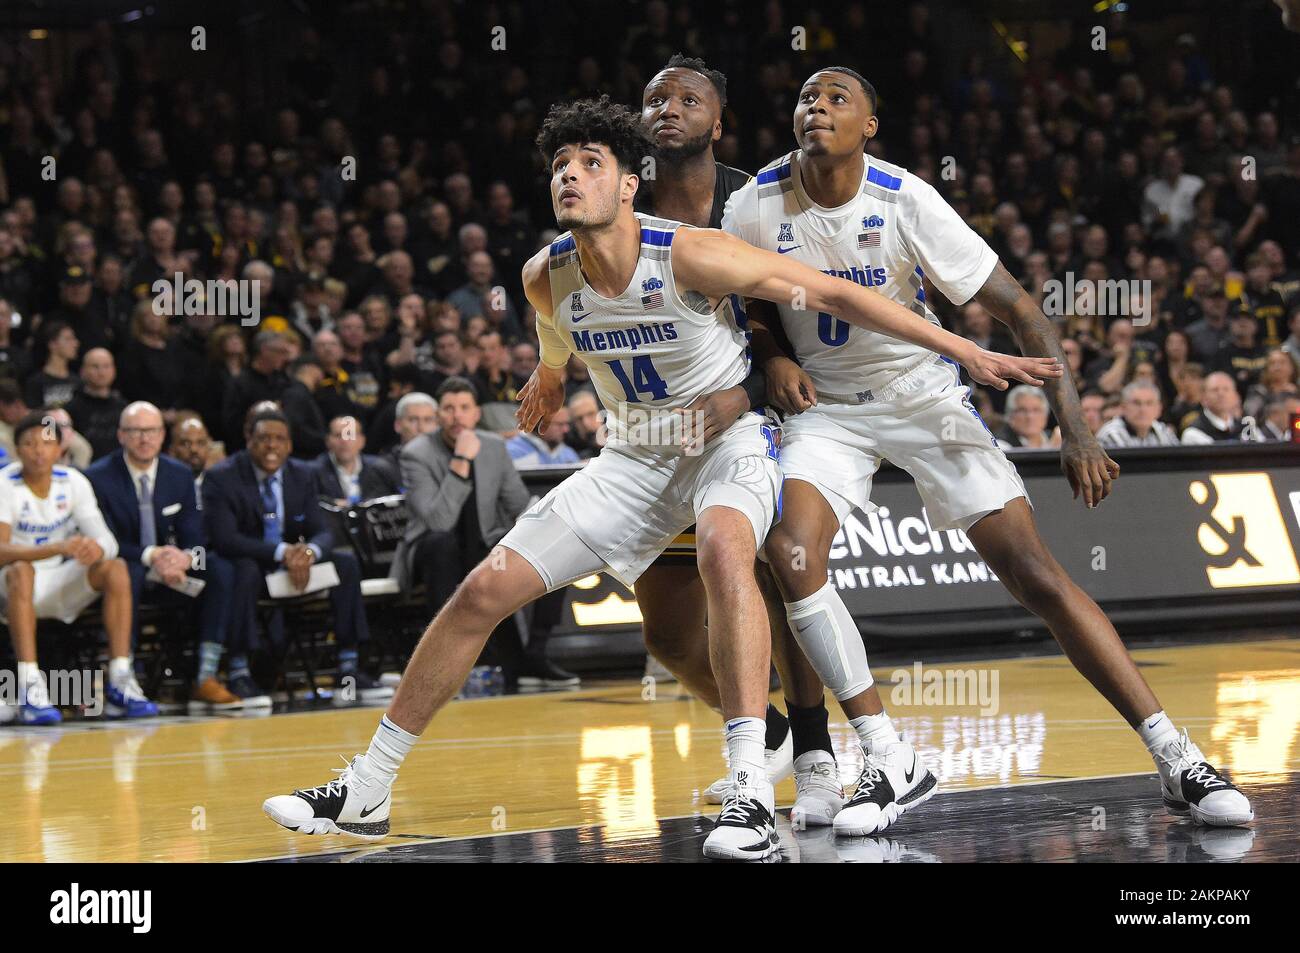 January 09, 2020: Memphis Tigers forward Isaiah Maurice (14) and Memphis  Tigers forward D.J. Jeffries (0) block out Wichita State Shockers center  Morris Udeze (24) on a free throw attempt during the